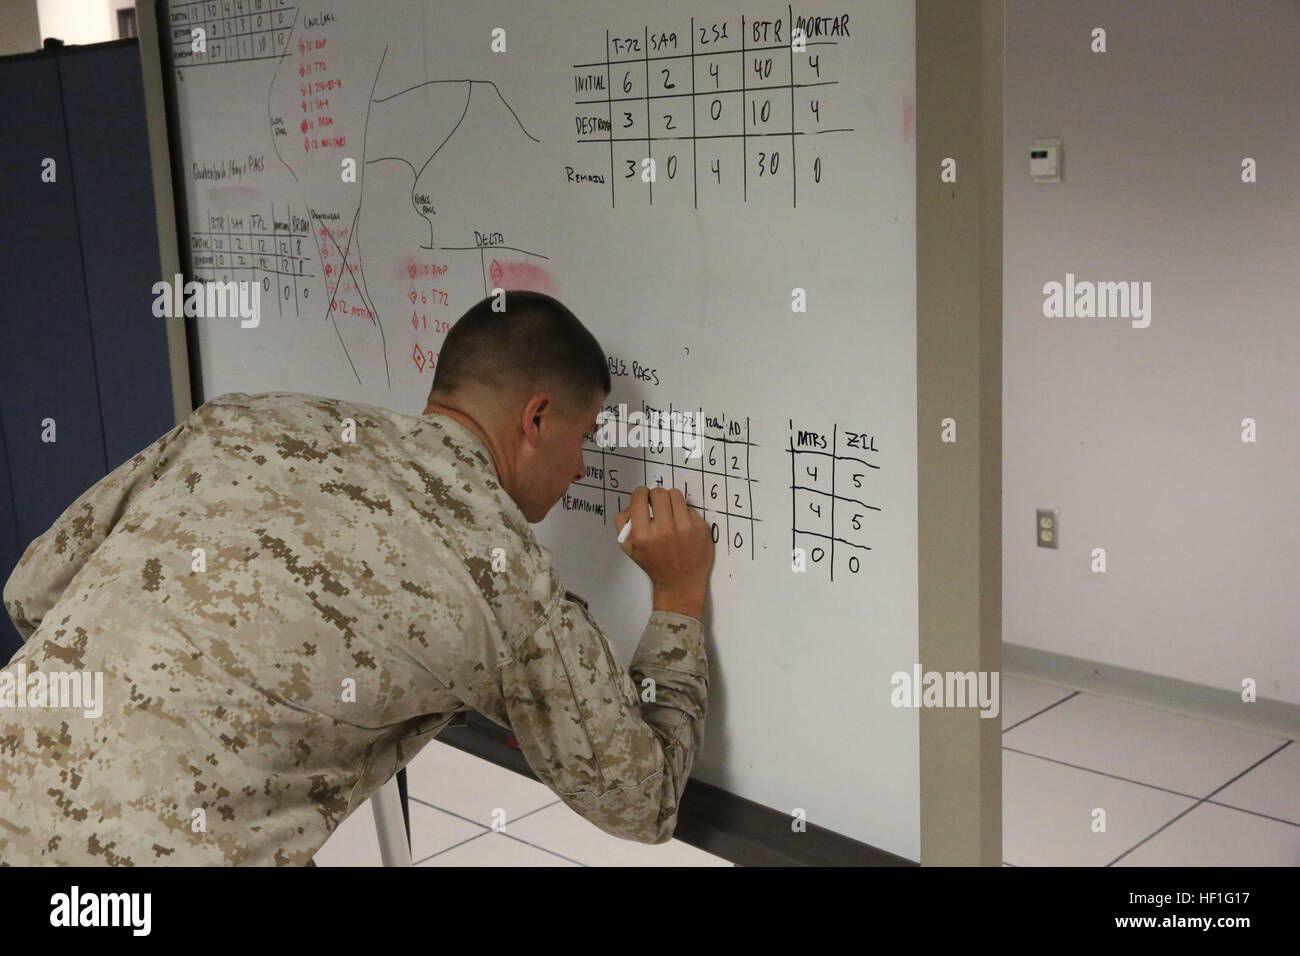 Corporal Nicholas B. Werner, an intelligence analyst with 6th Marine Regiment, 2nd Marine Division, and native of Troy, Pa, updates data on a map during a training command post exercise Sept. 18, 2013, inside the II Marine Expeditionary Force Simulation Center aboard Marine Corps Base Camp Lejeune. 'Part of being a Marine is that you have to be ready, so as the headquarters element we have to be ready to react to anything that comes up,' said Maj. Kemper Jones, the operations officer with 6th Marines, from Richmond, Va. 'It is part of our progressive training plan to make sure we are crawling, Stock Photo